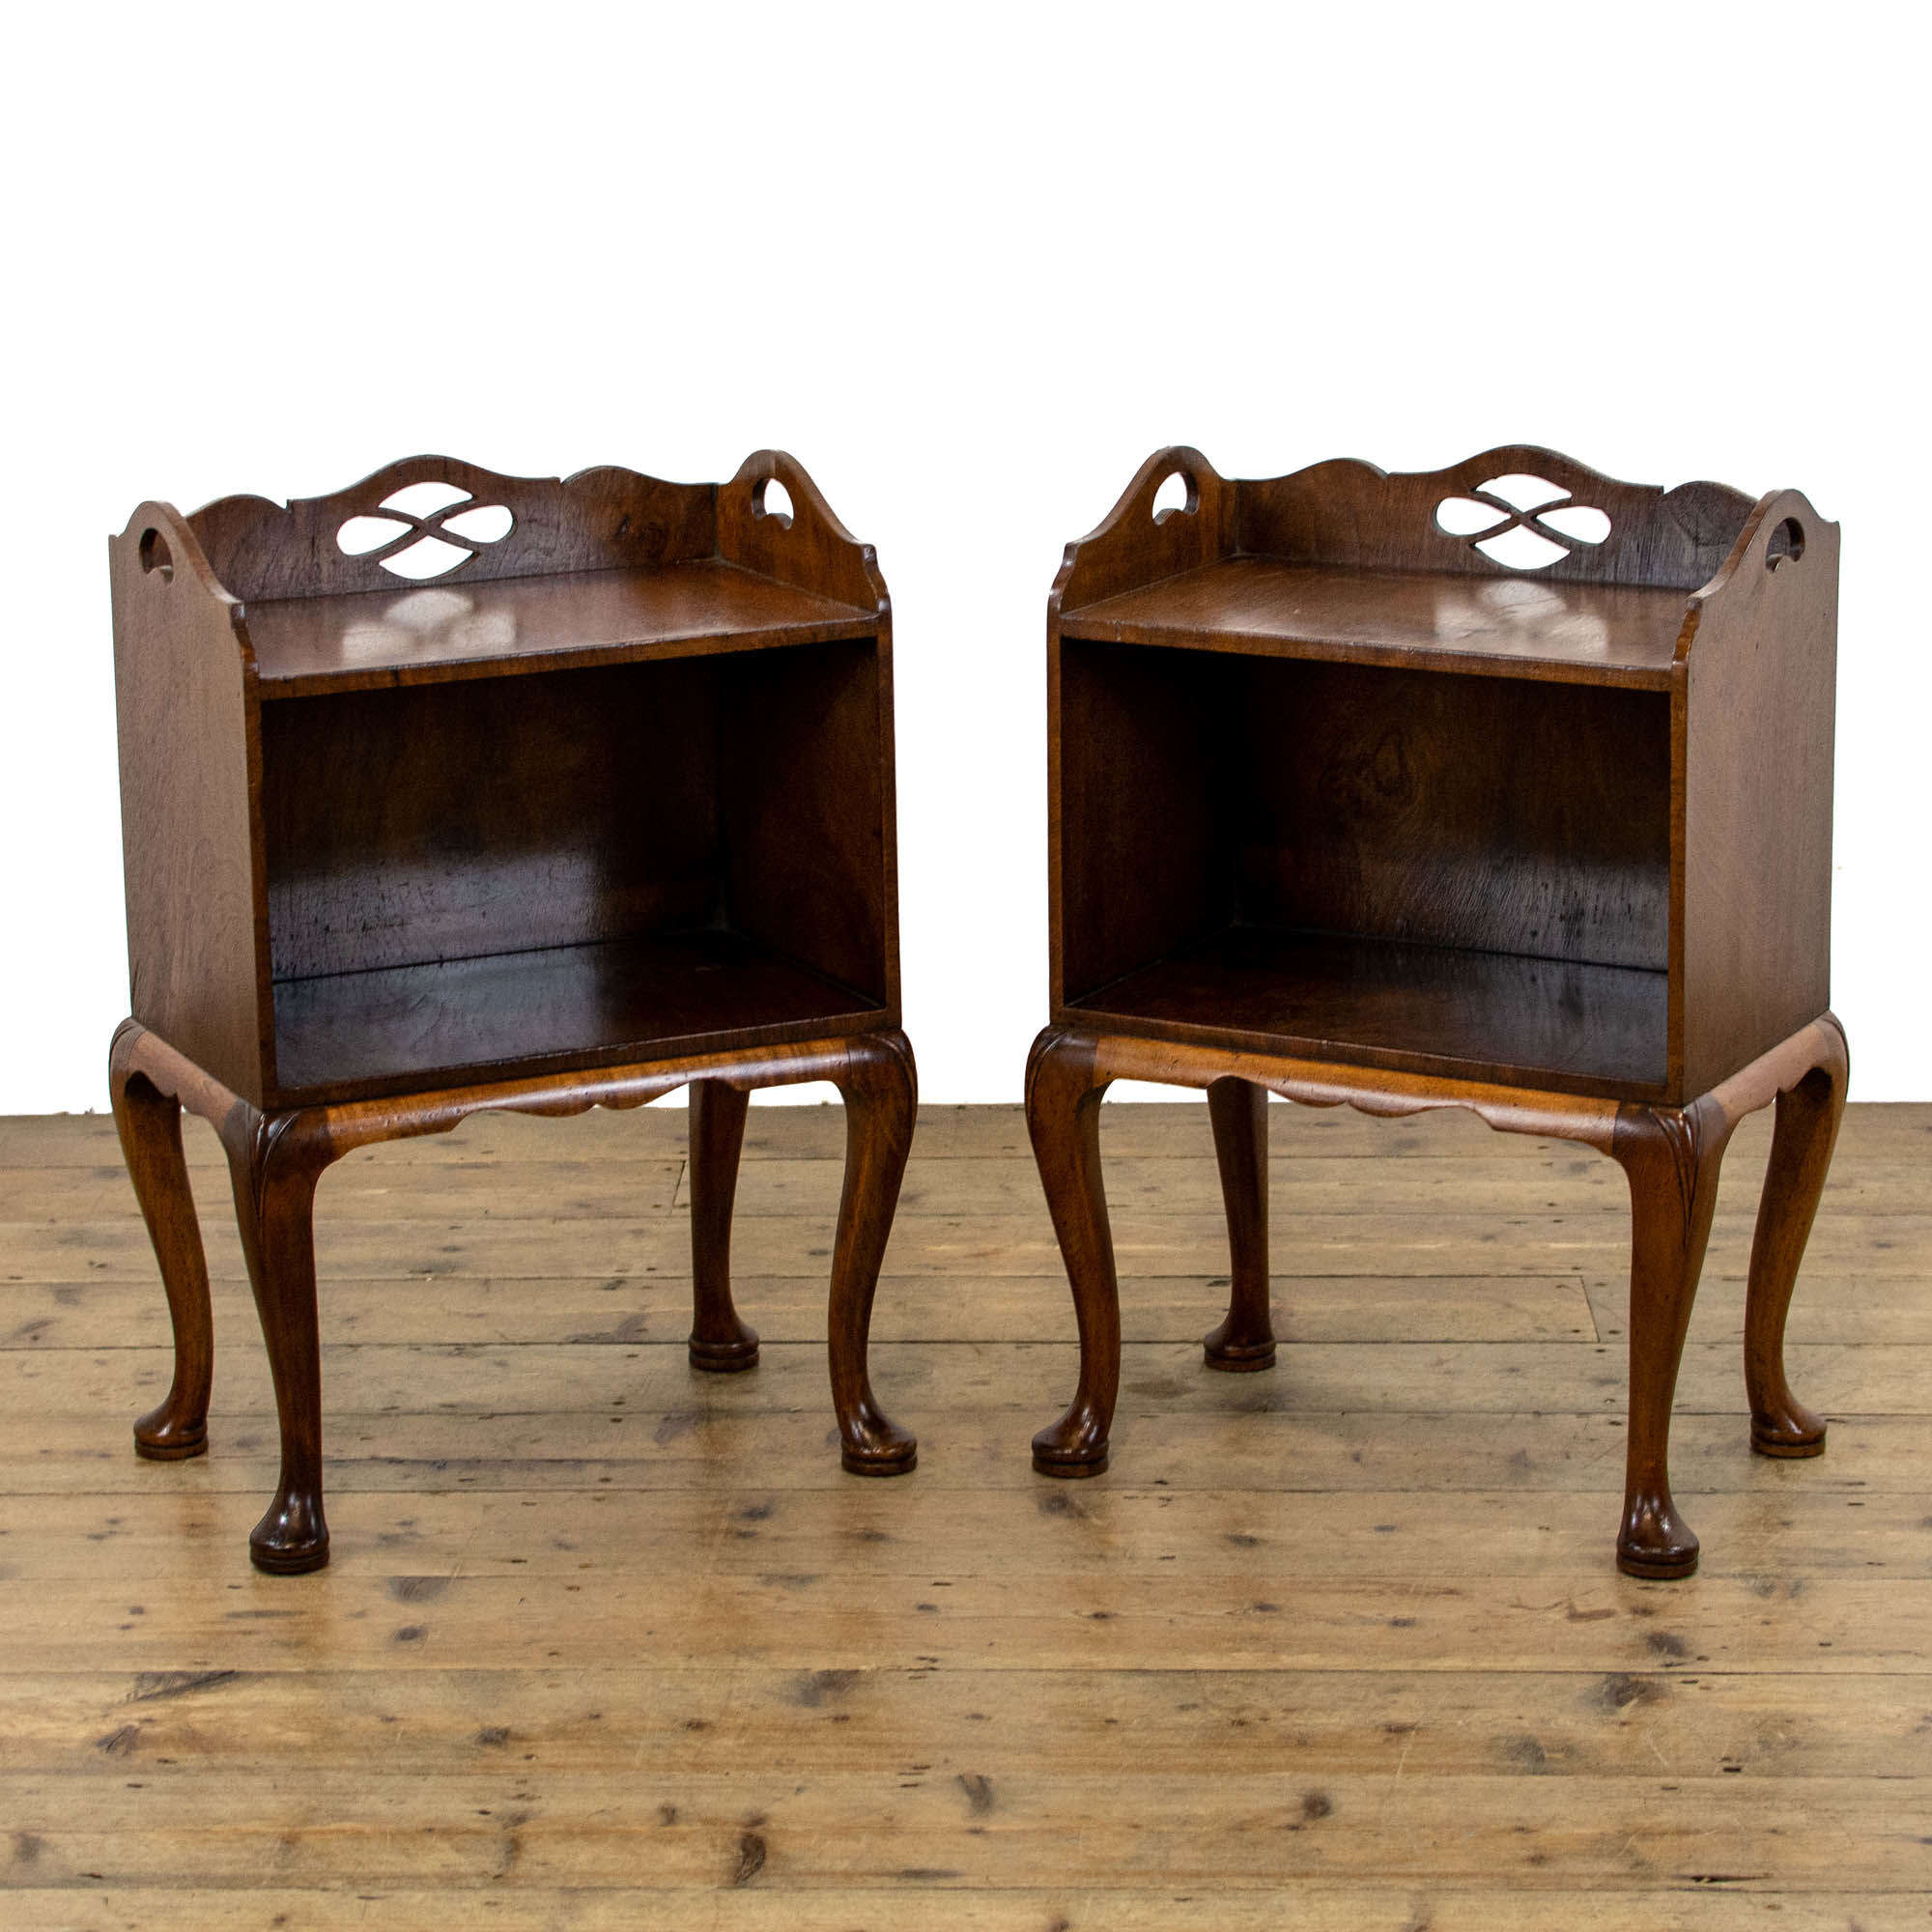 Pair of Antique Walnut Bedside Tables